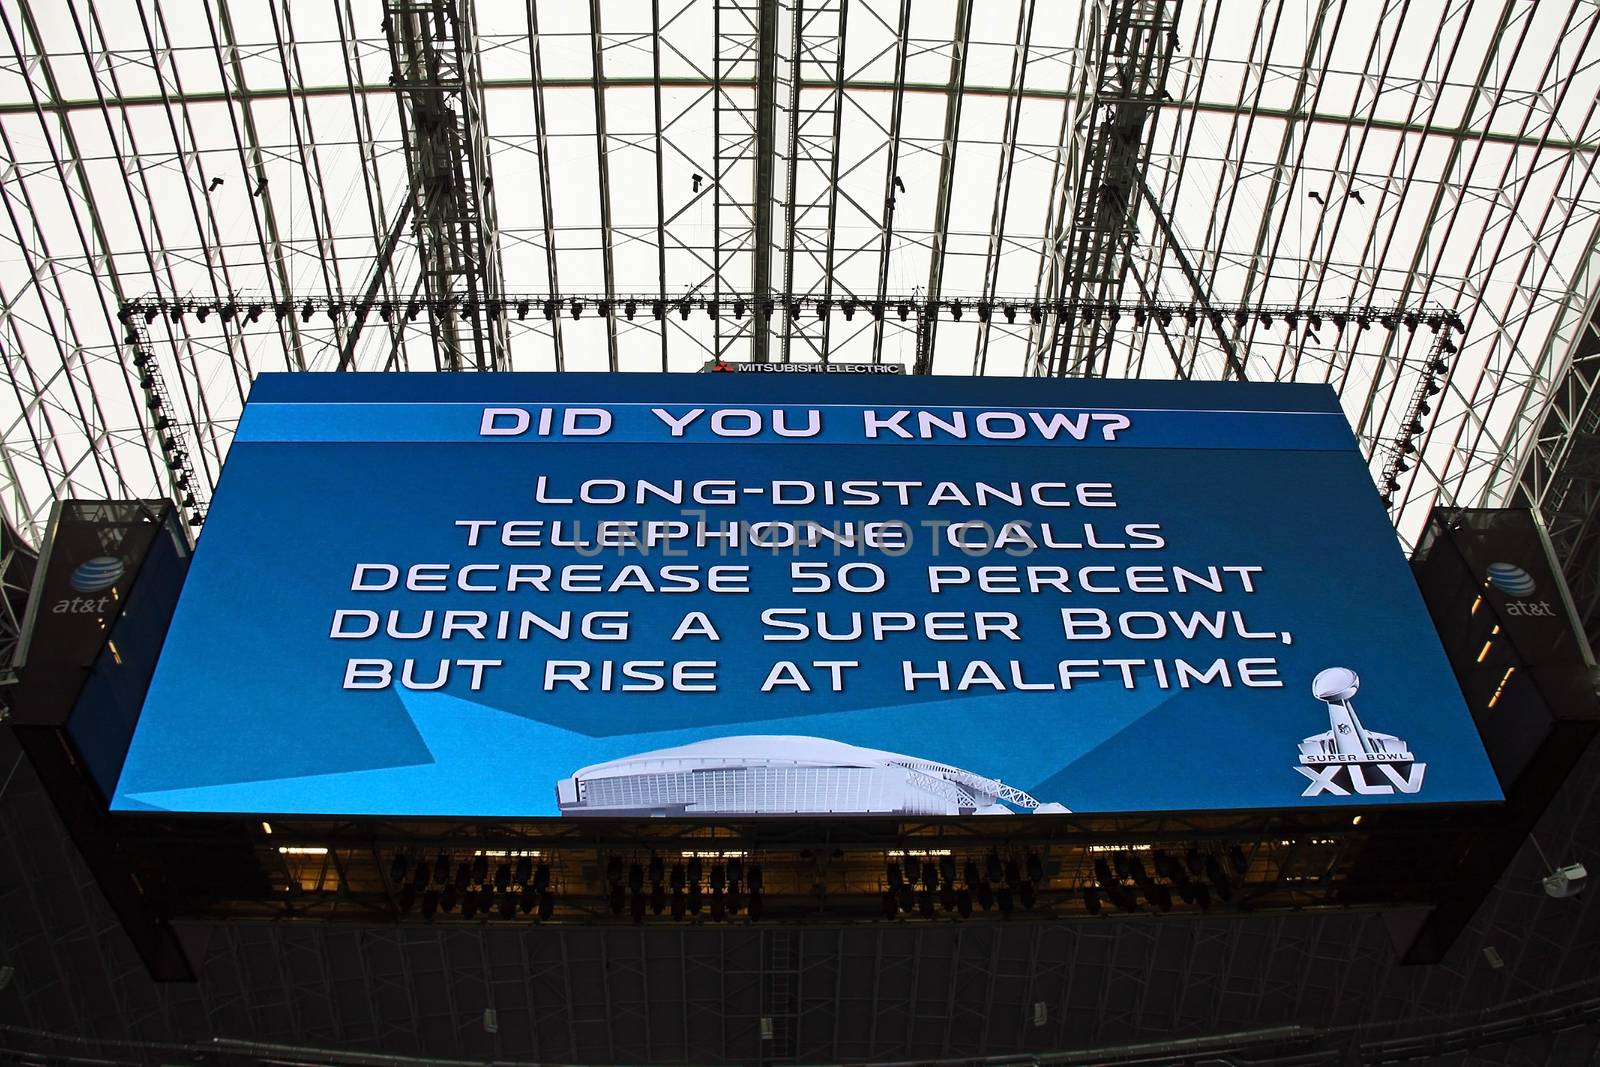 ARLINGTON - JAN 26: A view of the giant scoreboard in Cowboys Stadium in Arlington, Texas - sight of Super Bowl XLV. Scoreboard is listed in the Guinness Book of World Records. Taken January 26, 2011 in Arlington, TX.